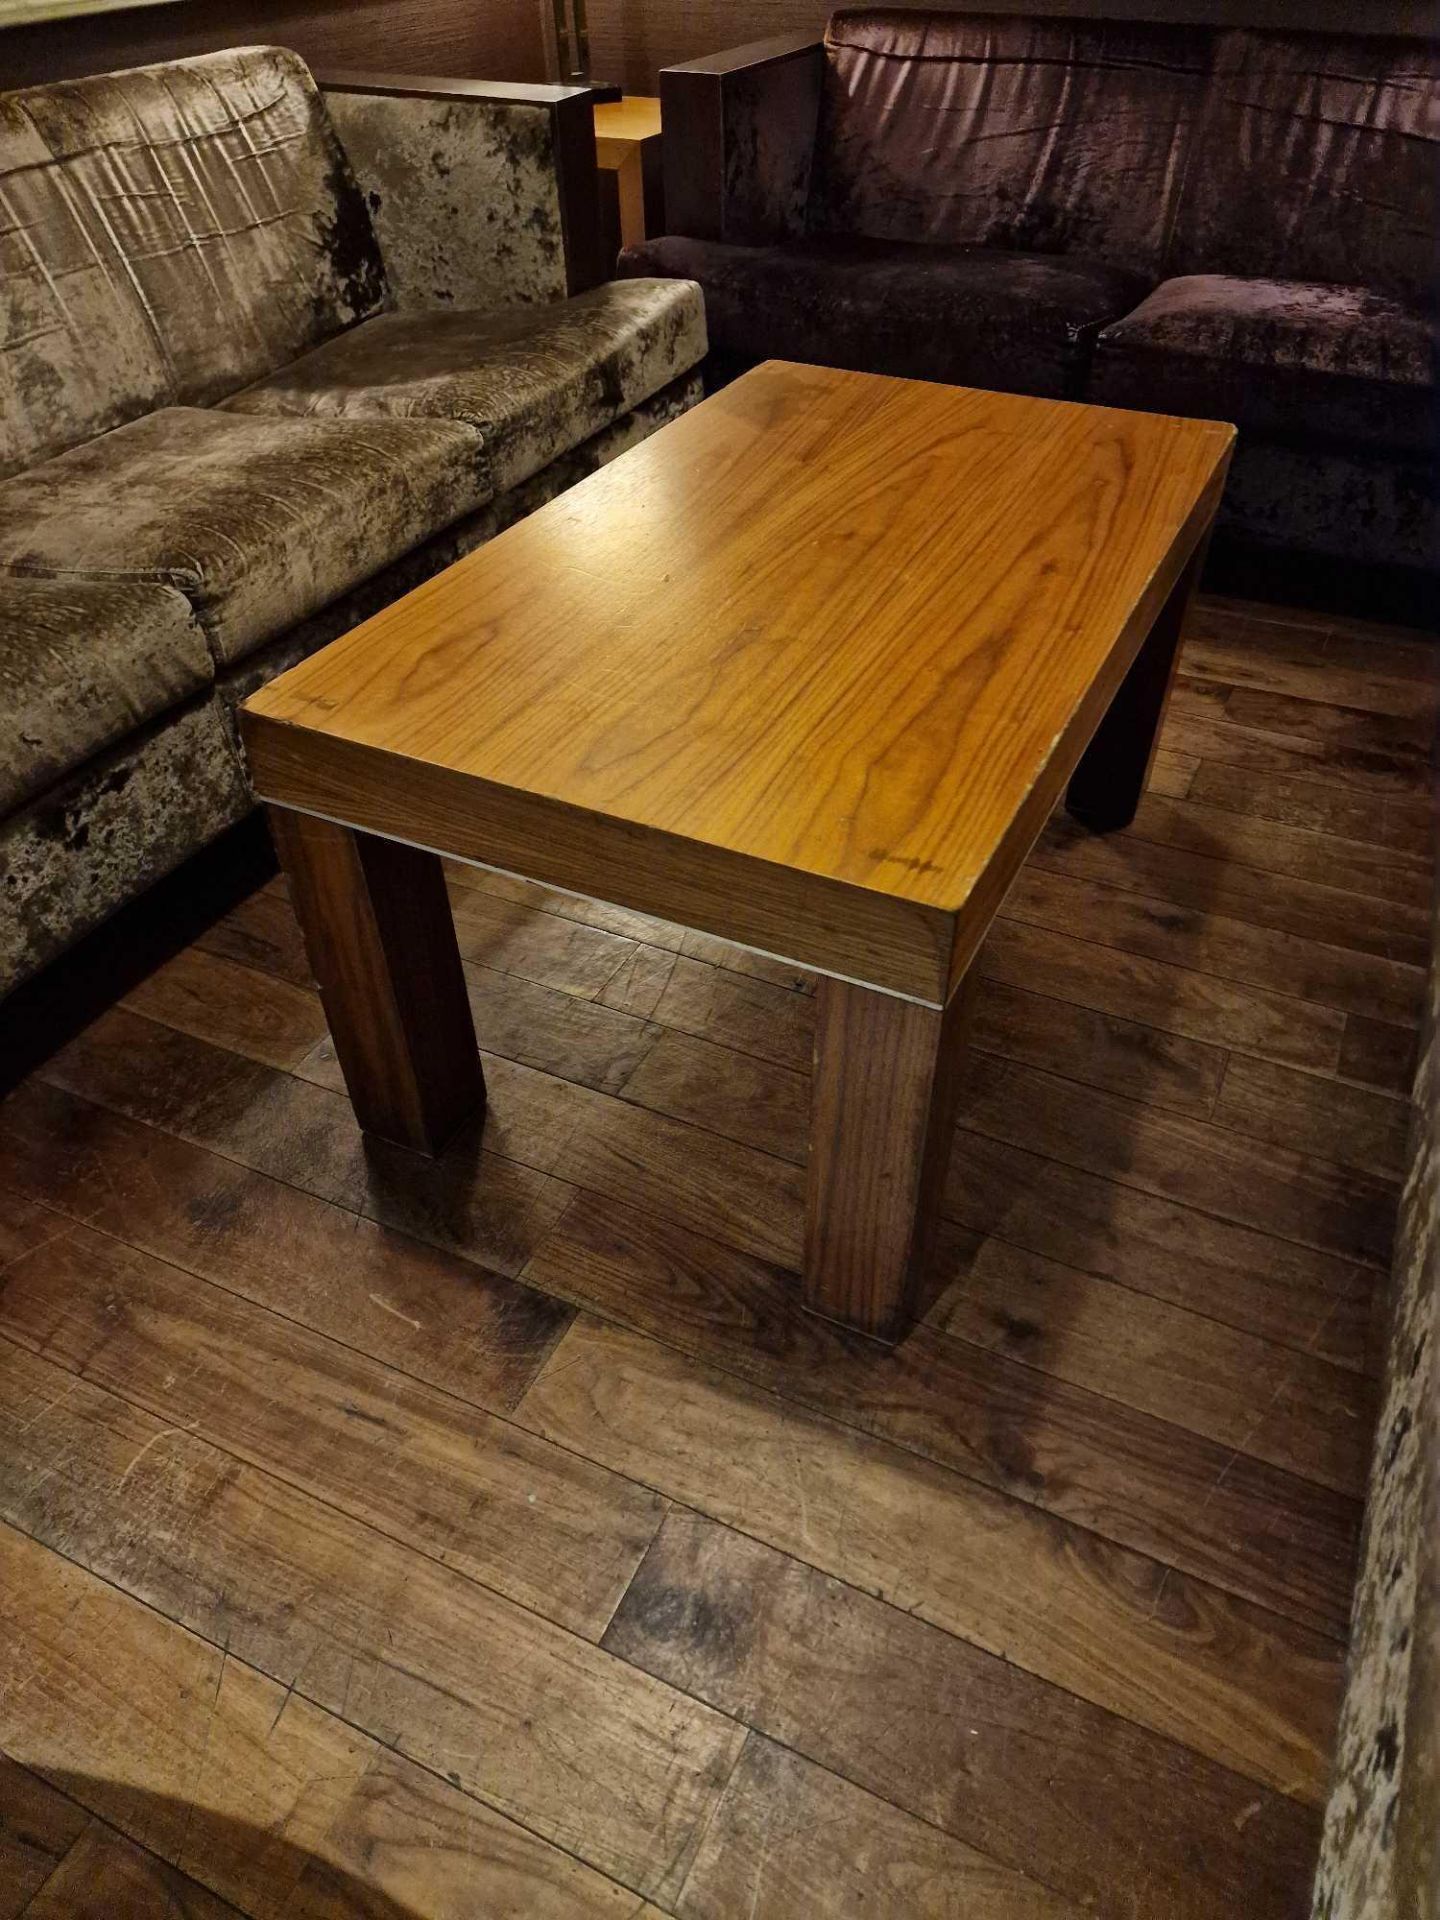 Wooden coffee table with stainless stele trim 100 x 60 x 50cm ( Location: Browns) - Image 2 of 2